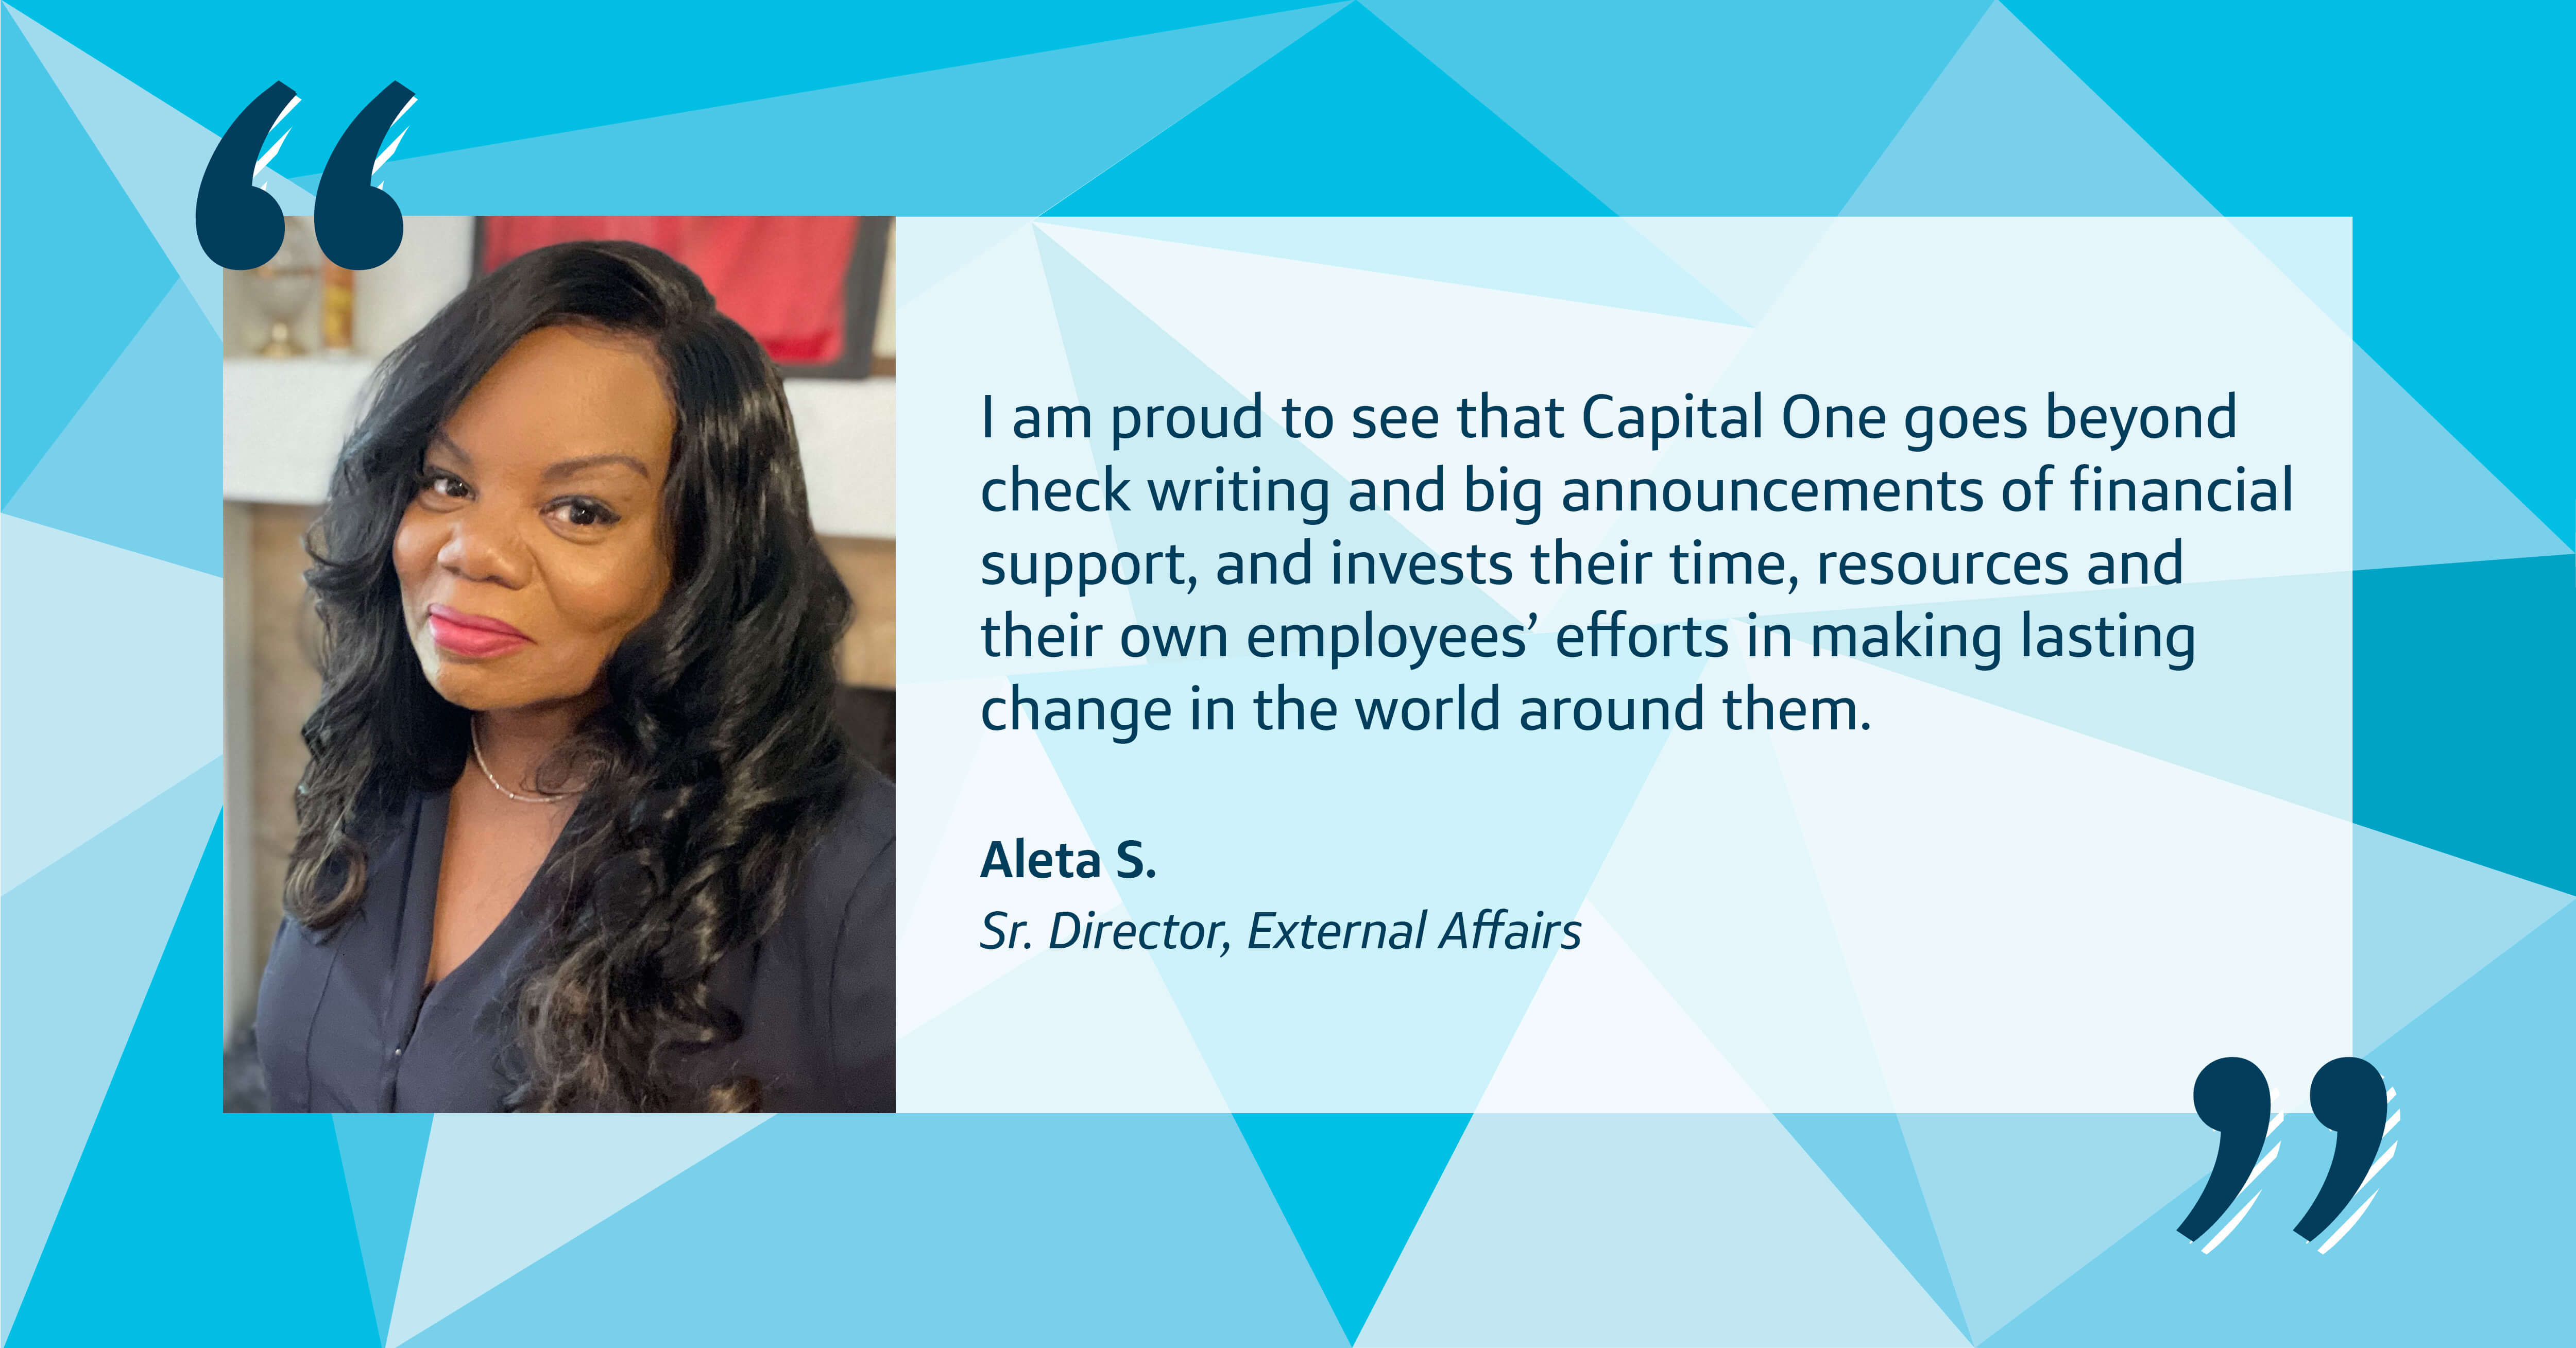 A blue patterned background with a picture of Aleta, Capital One leader, and a quote that says, "I am proud to see that Capital One goes beyond check writing and big announcements of financial support, and invests their time, resources and their own employees’ efforts in making lasting change in the world around them." - Aleta S., Senior Director at Capital One, External Affairs